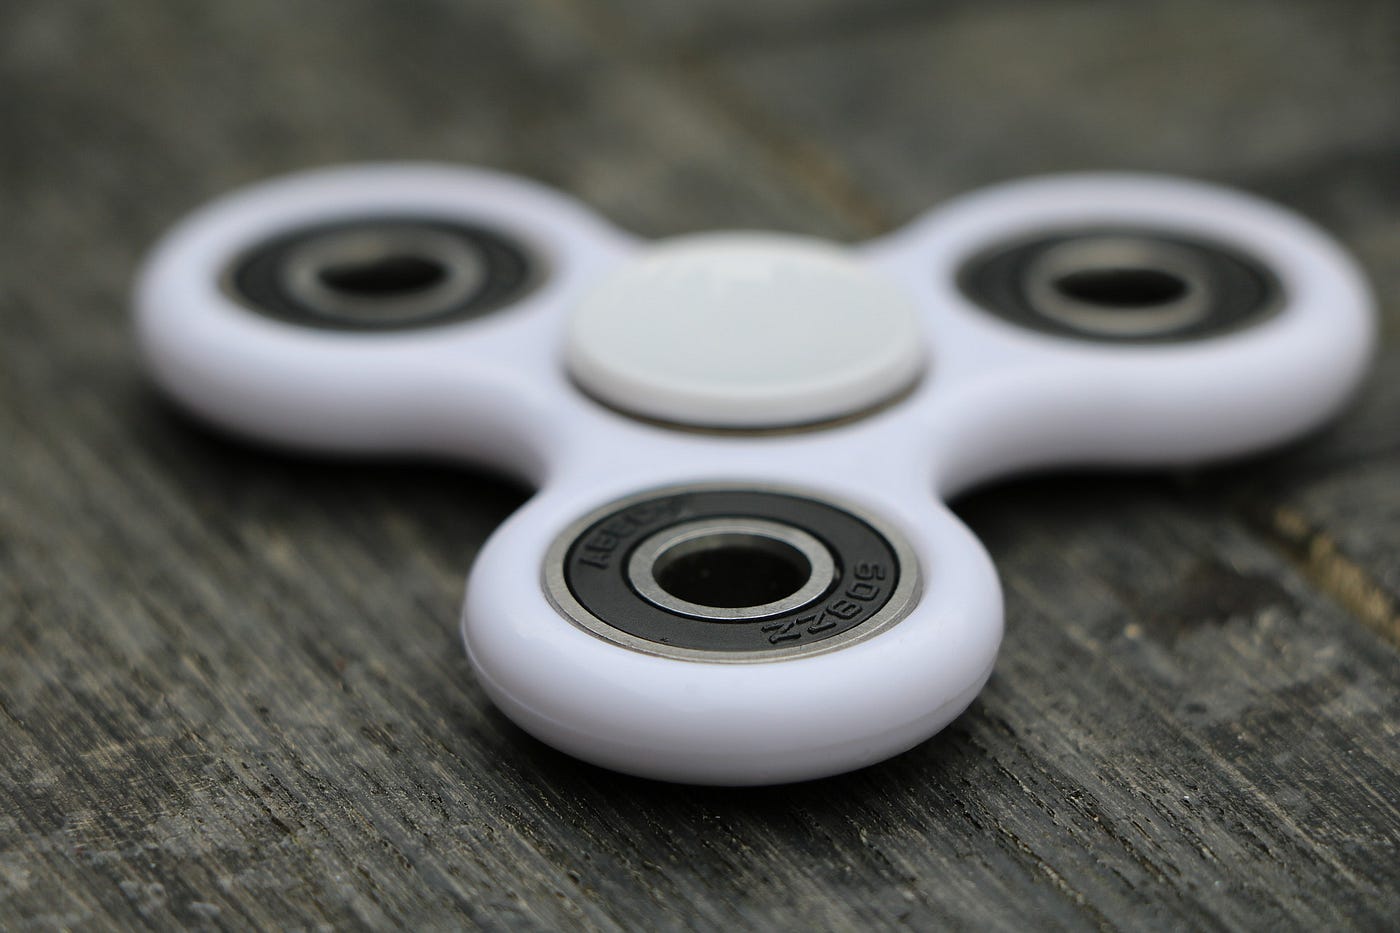 All The Wrong People Are Asking All The Wrong Questions About Fidget  Spinners | by Sarah Kurchak | The Establishment | Medium